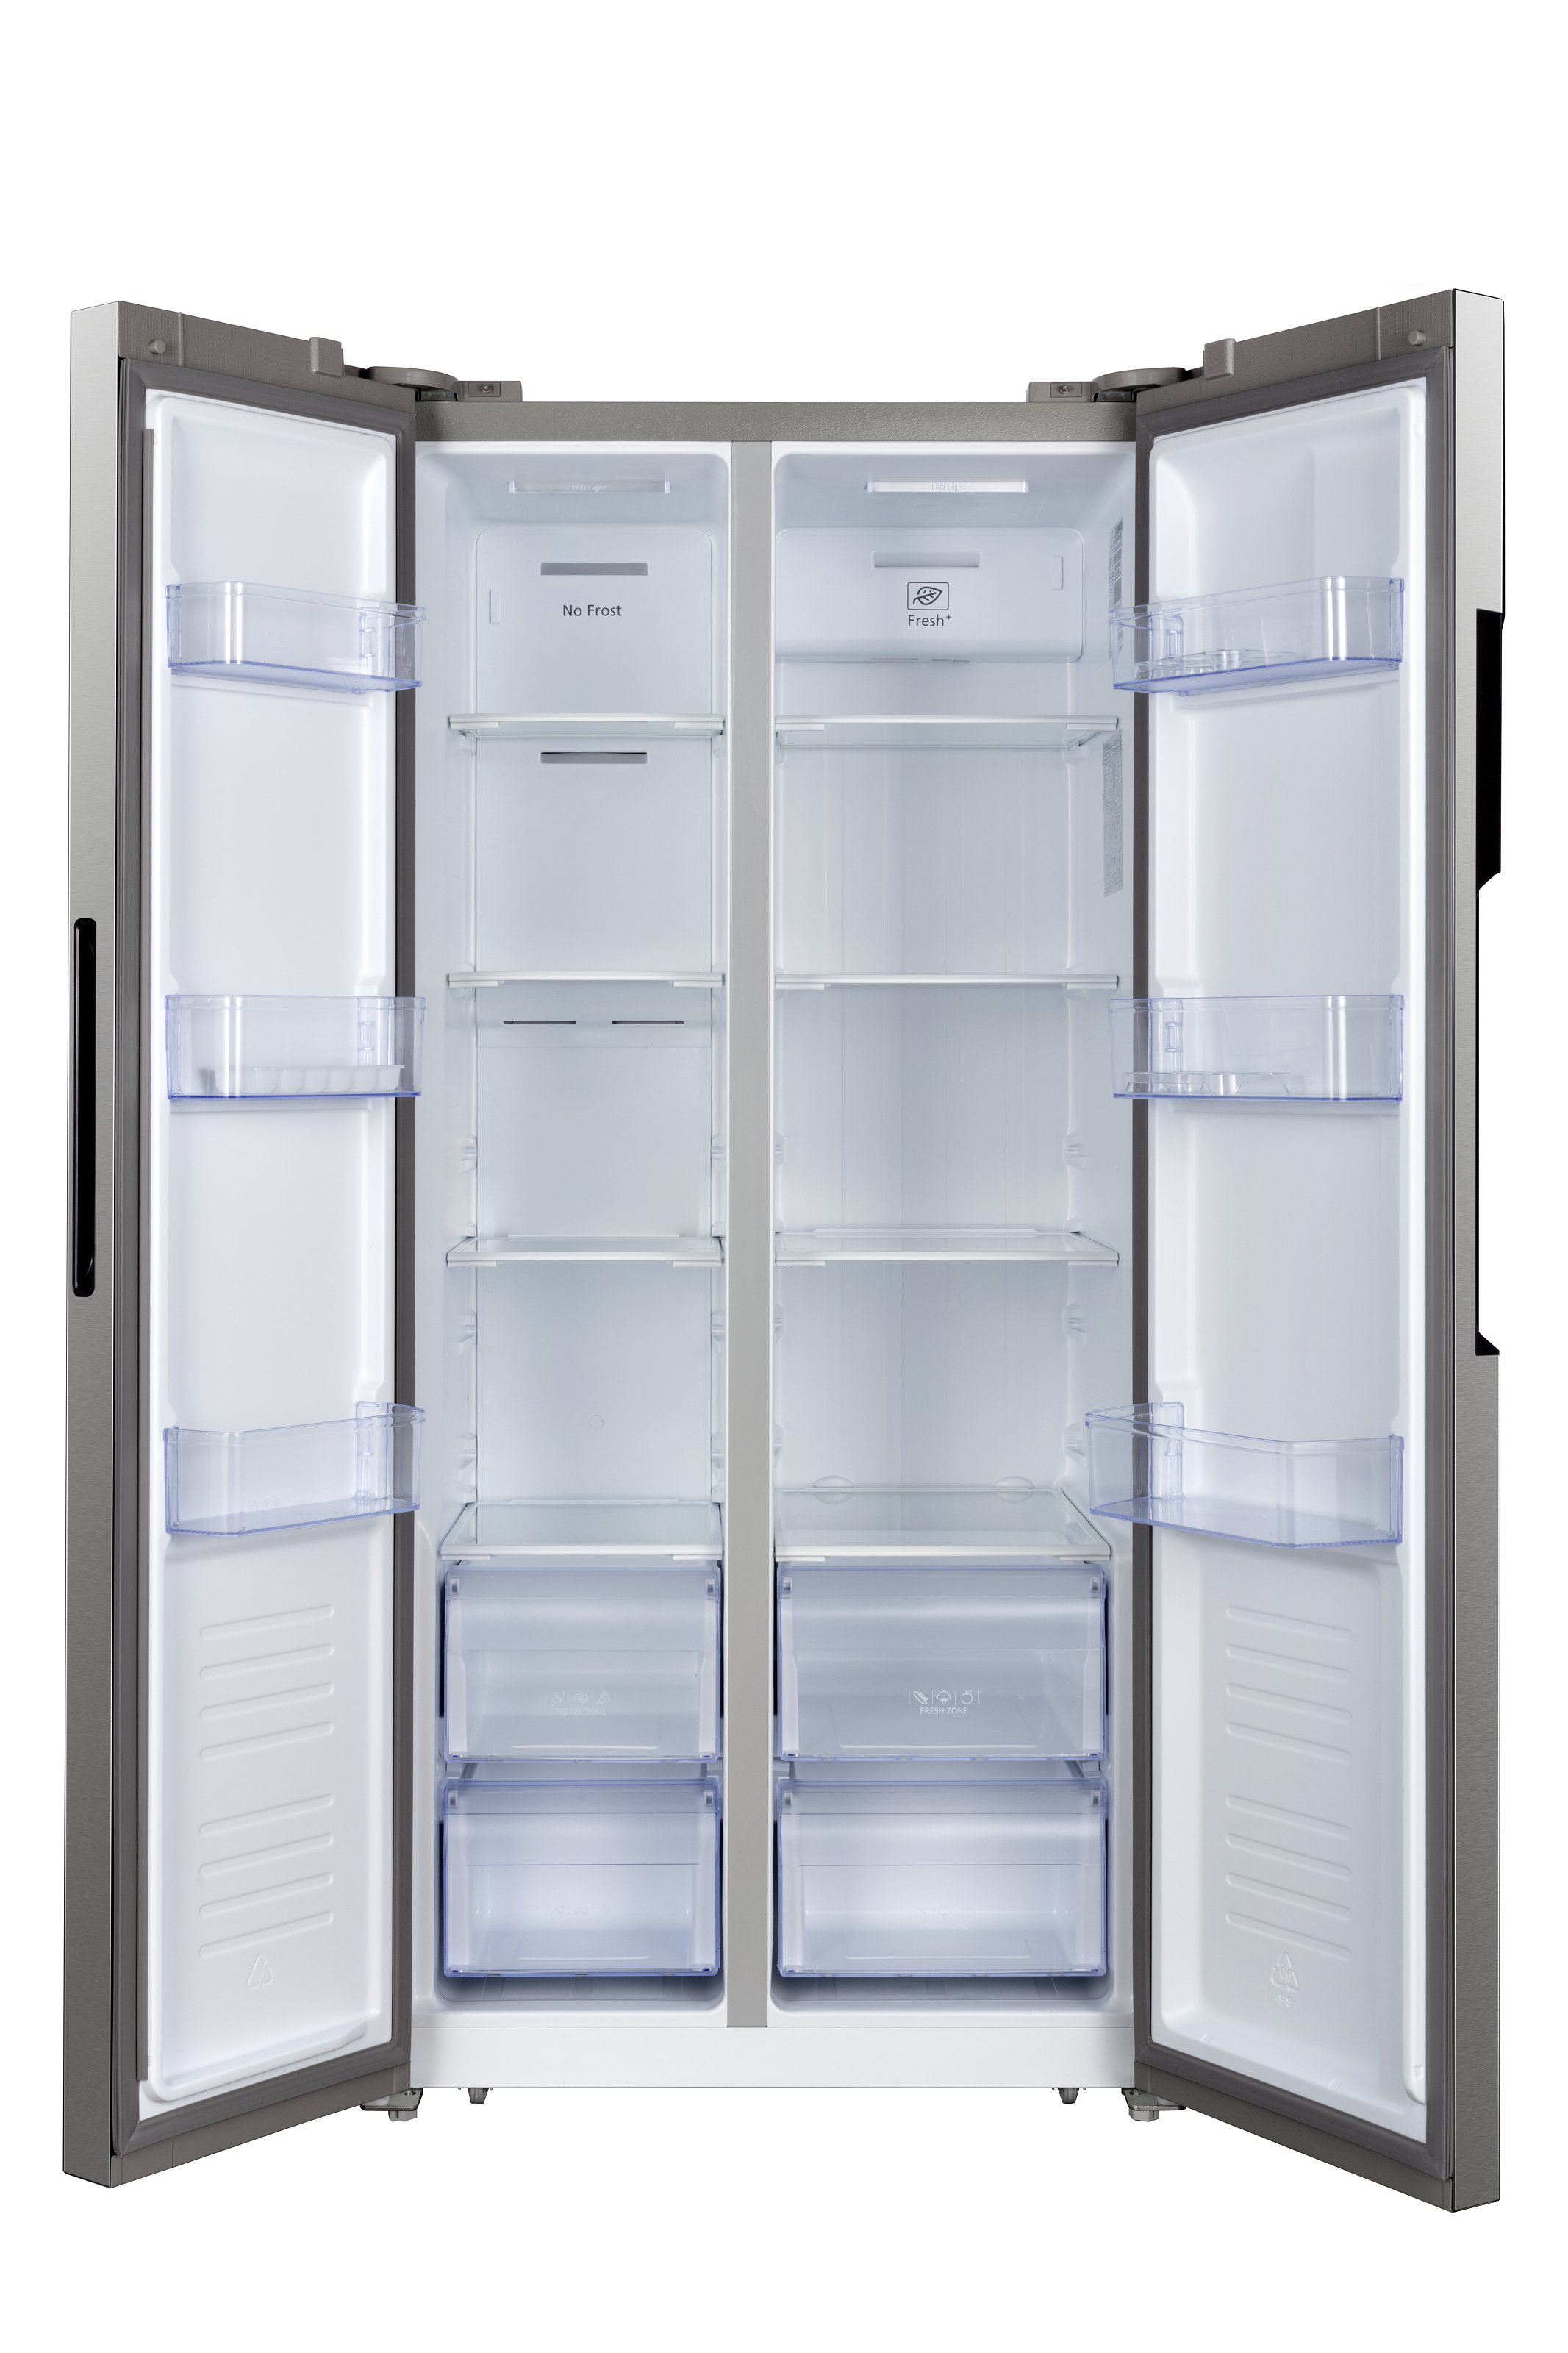 Hamilton Beach 15.6 cu. Ft. Side by side Stainless Refrigerator, Freestanding Installation, HZ8551 - image 5 of 6